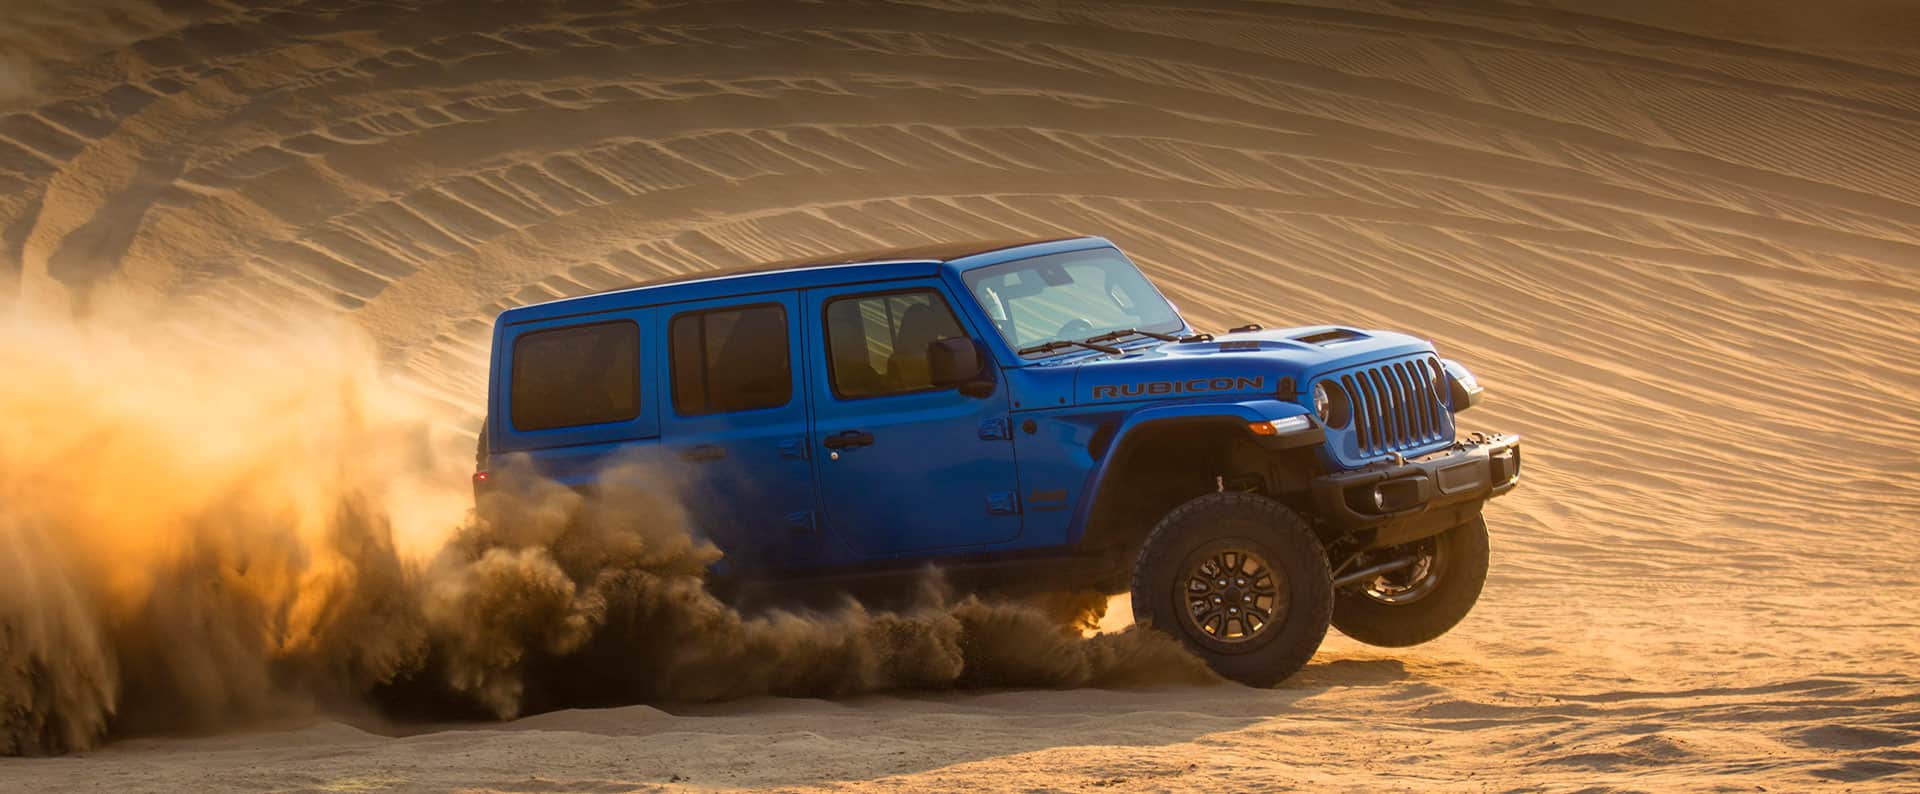 The 2021 Jeep Wrangler Rubicon 392 being driven on a sand dune, a cloud of dust coming from its wheels.